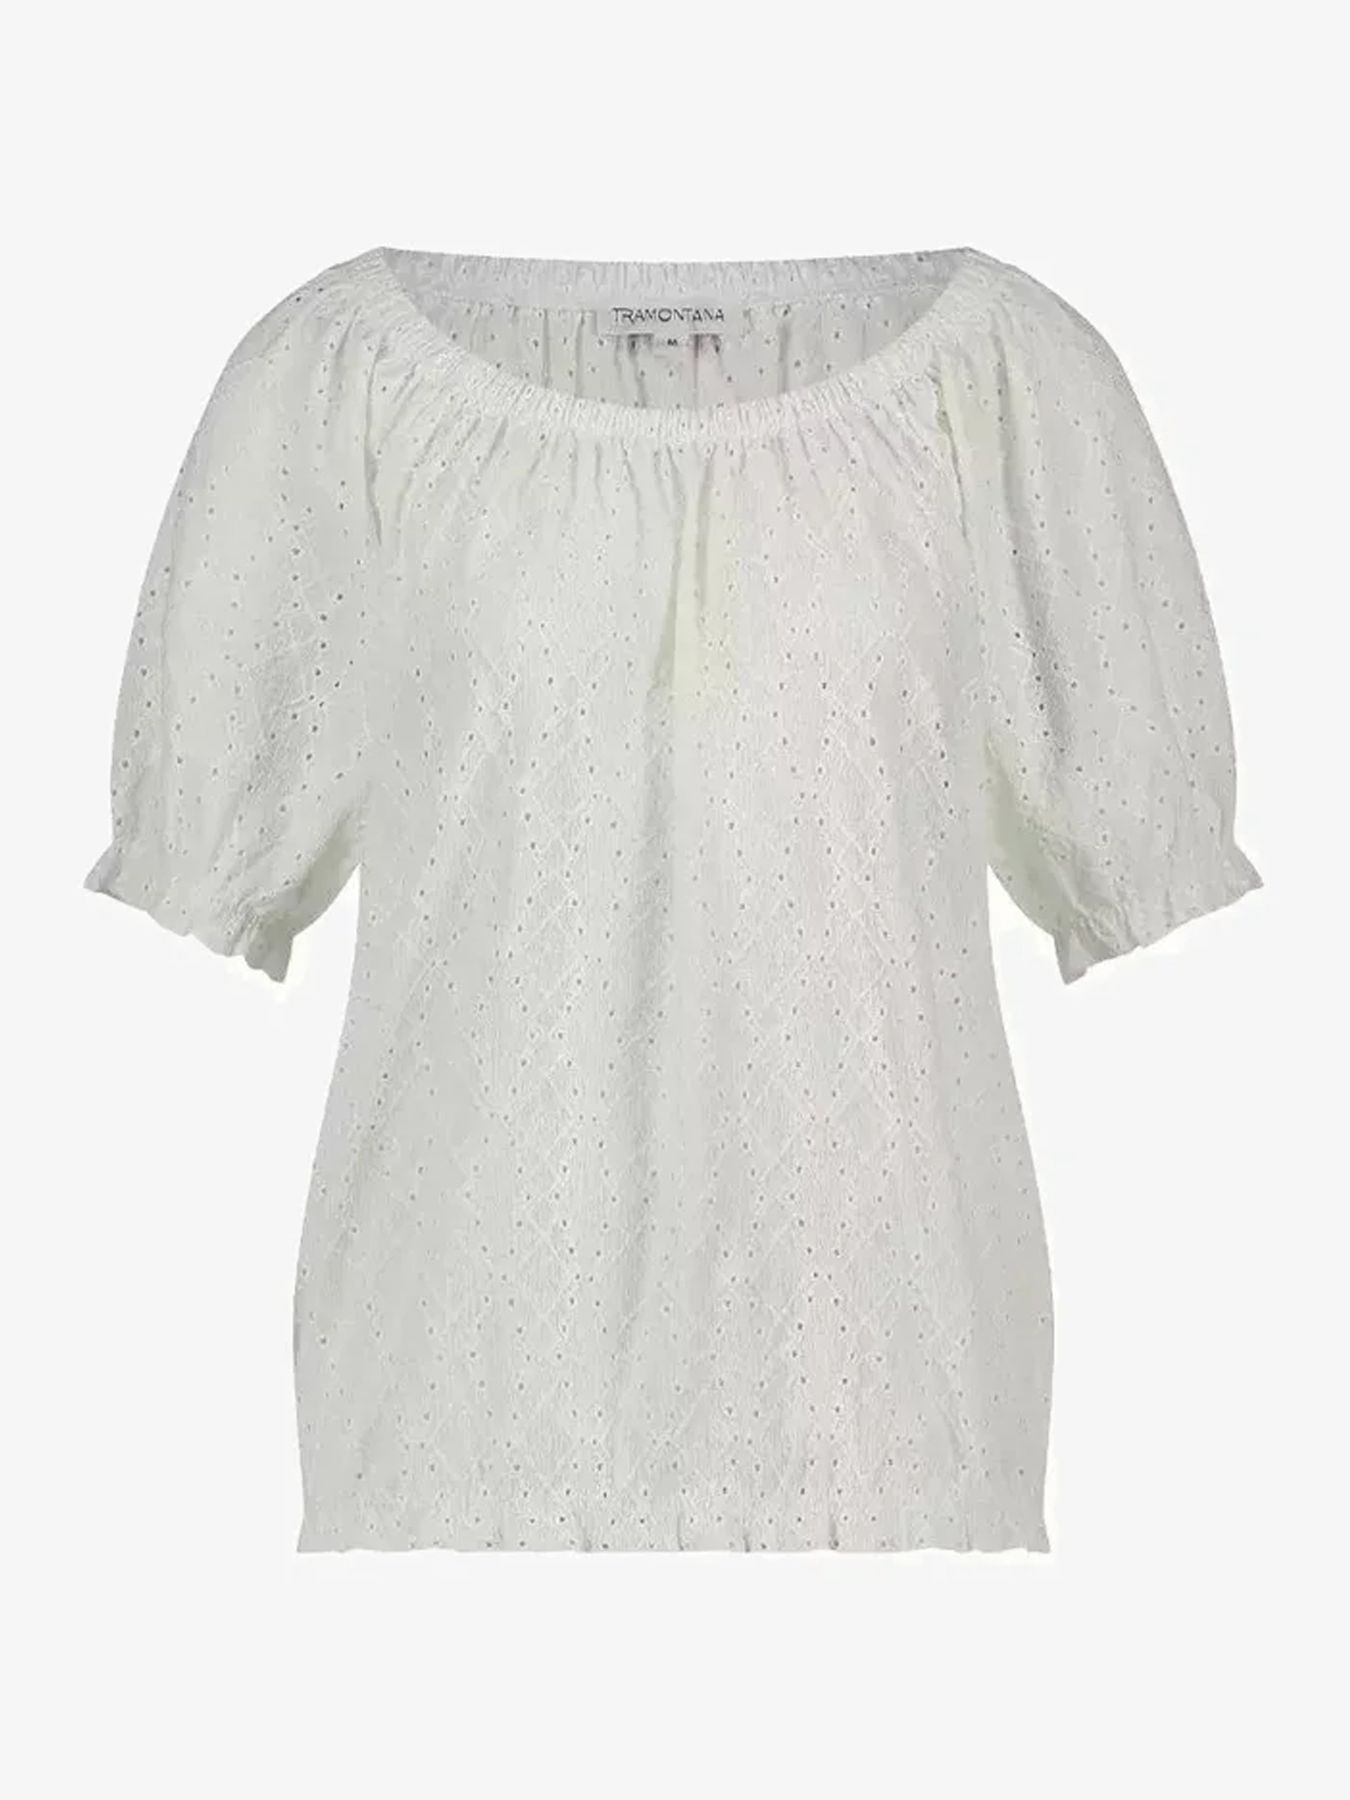 Tramontana Top Embroidery Stretch White 001000 2900144208042